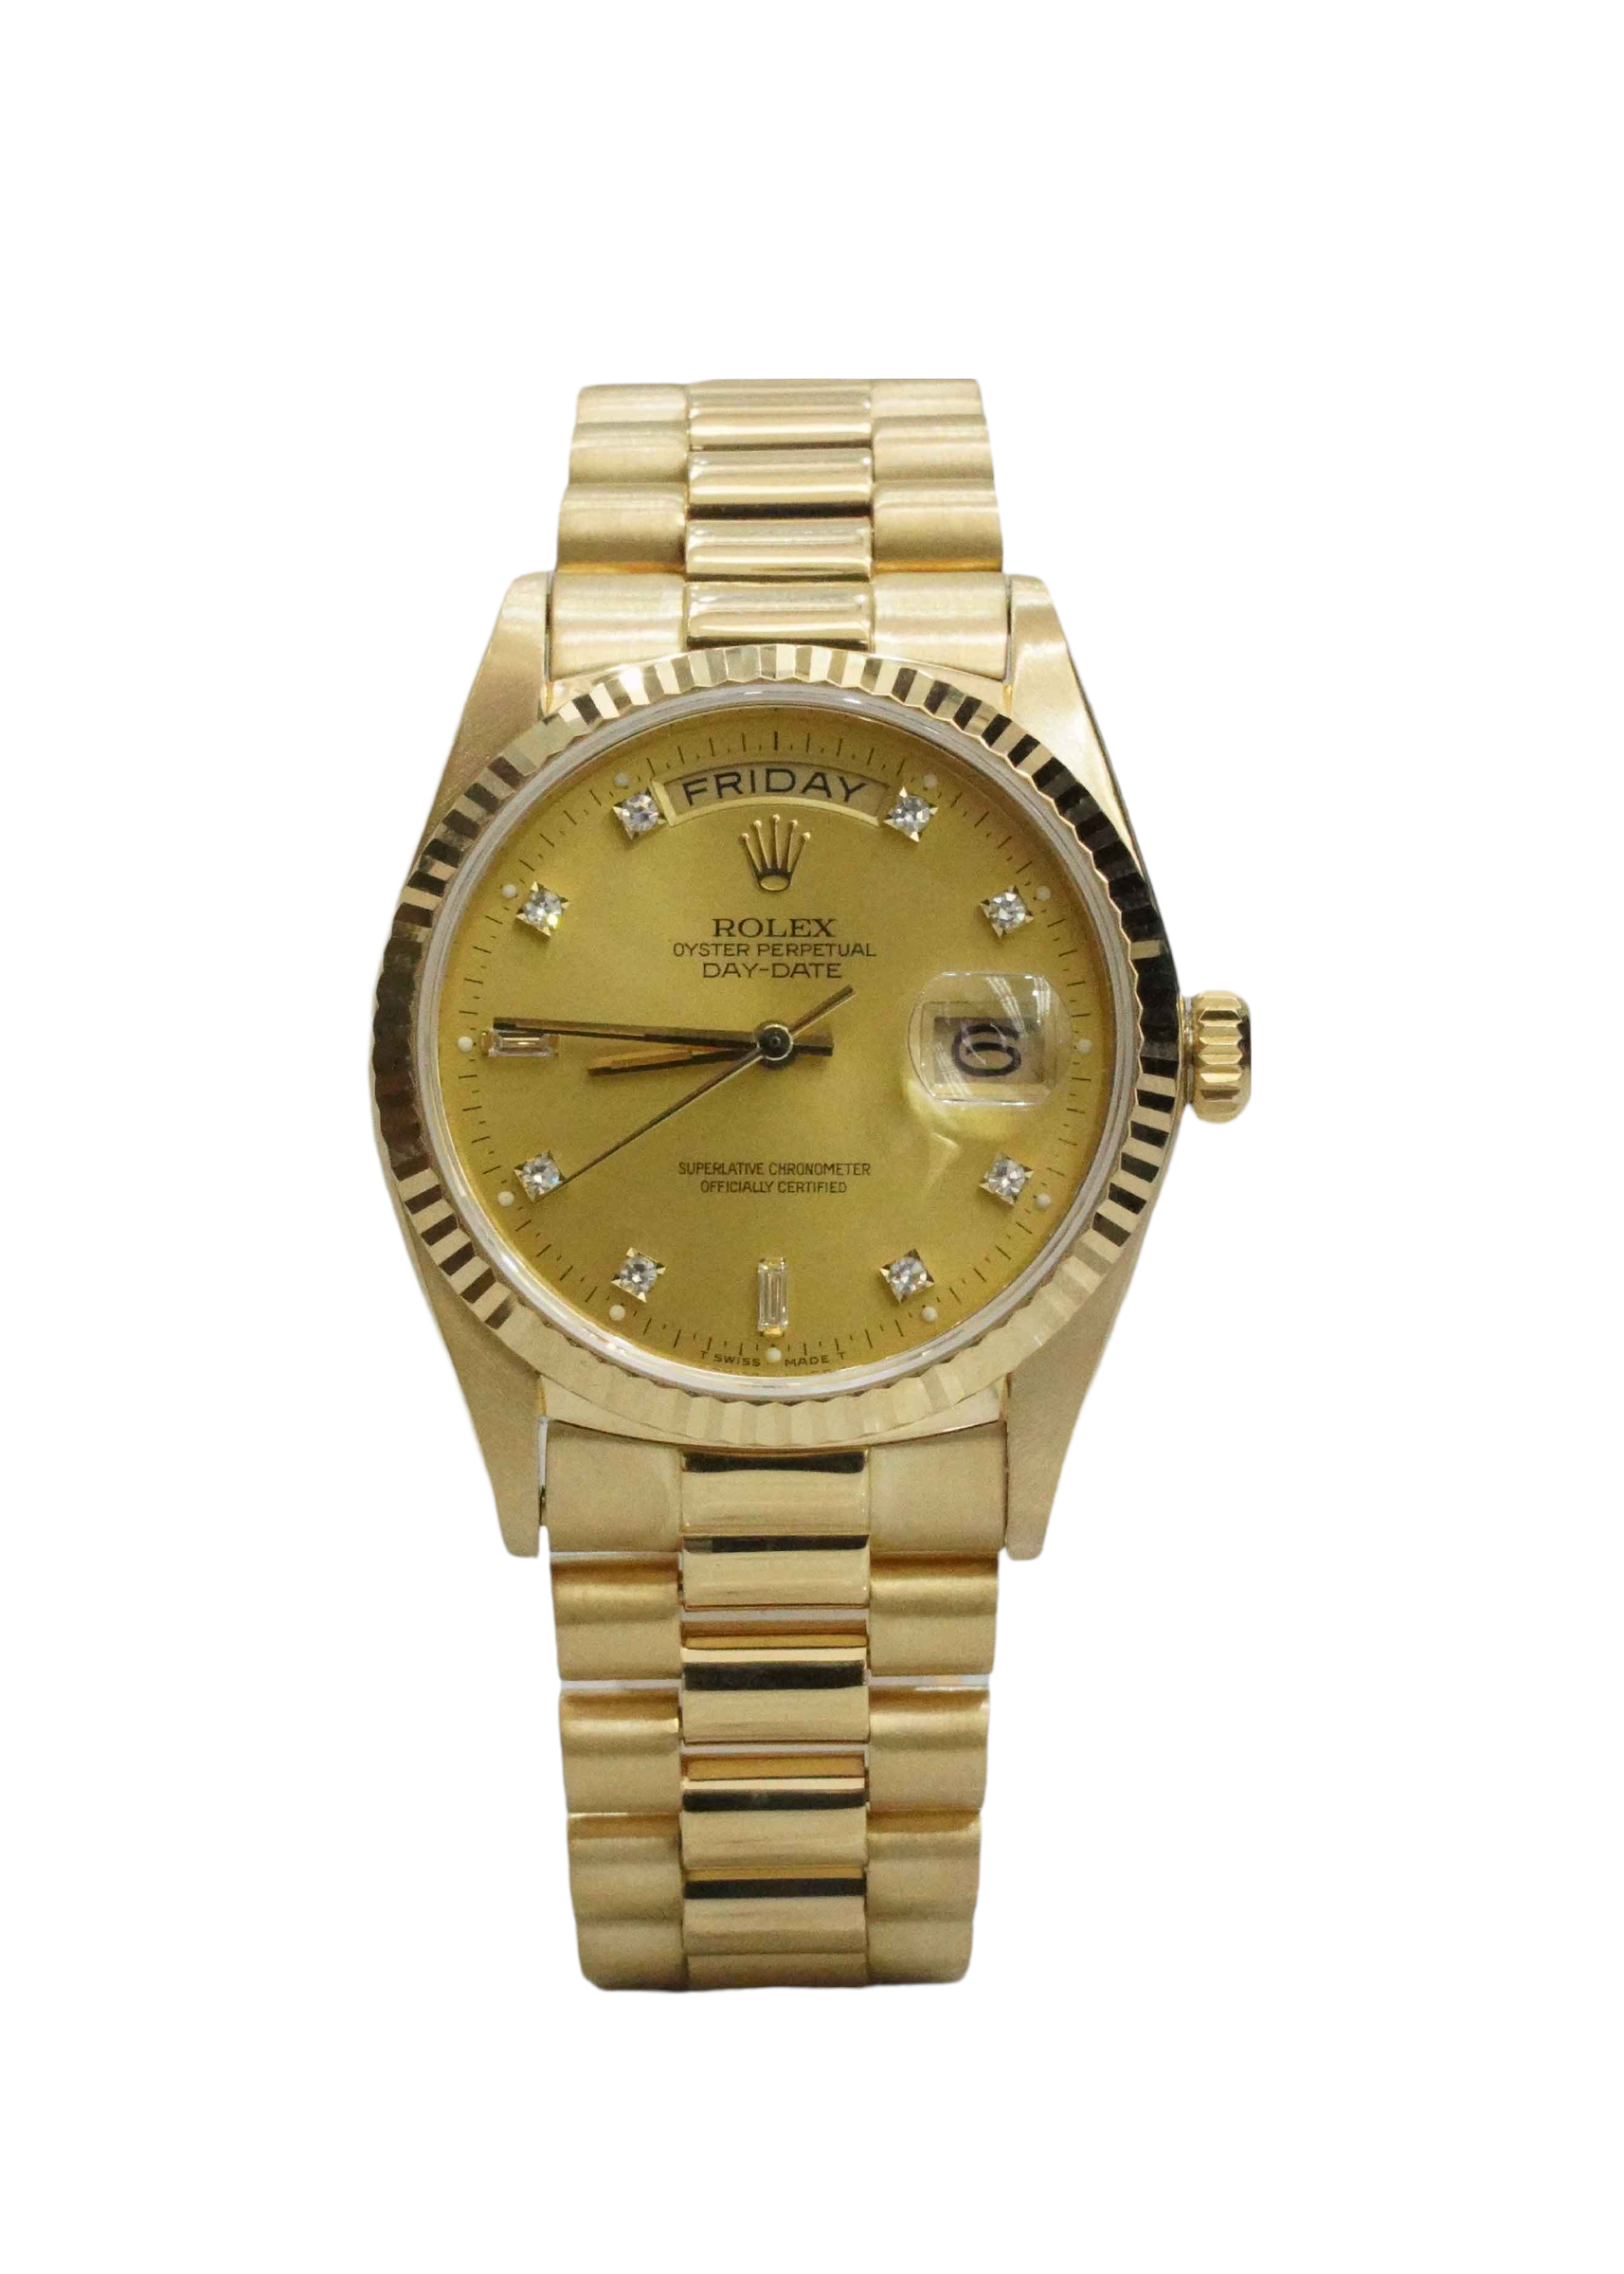 Rolex Day Date President 36mm 18K Yellow Gold Watch 18038